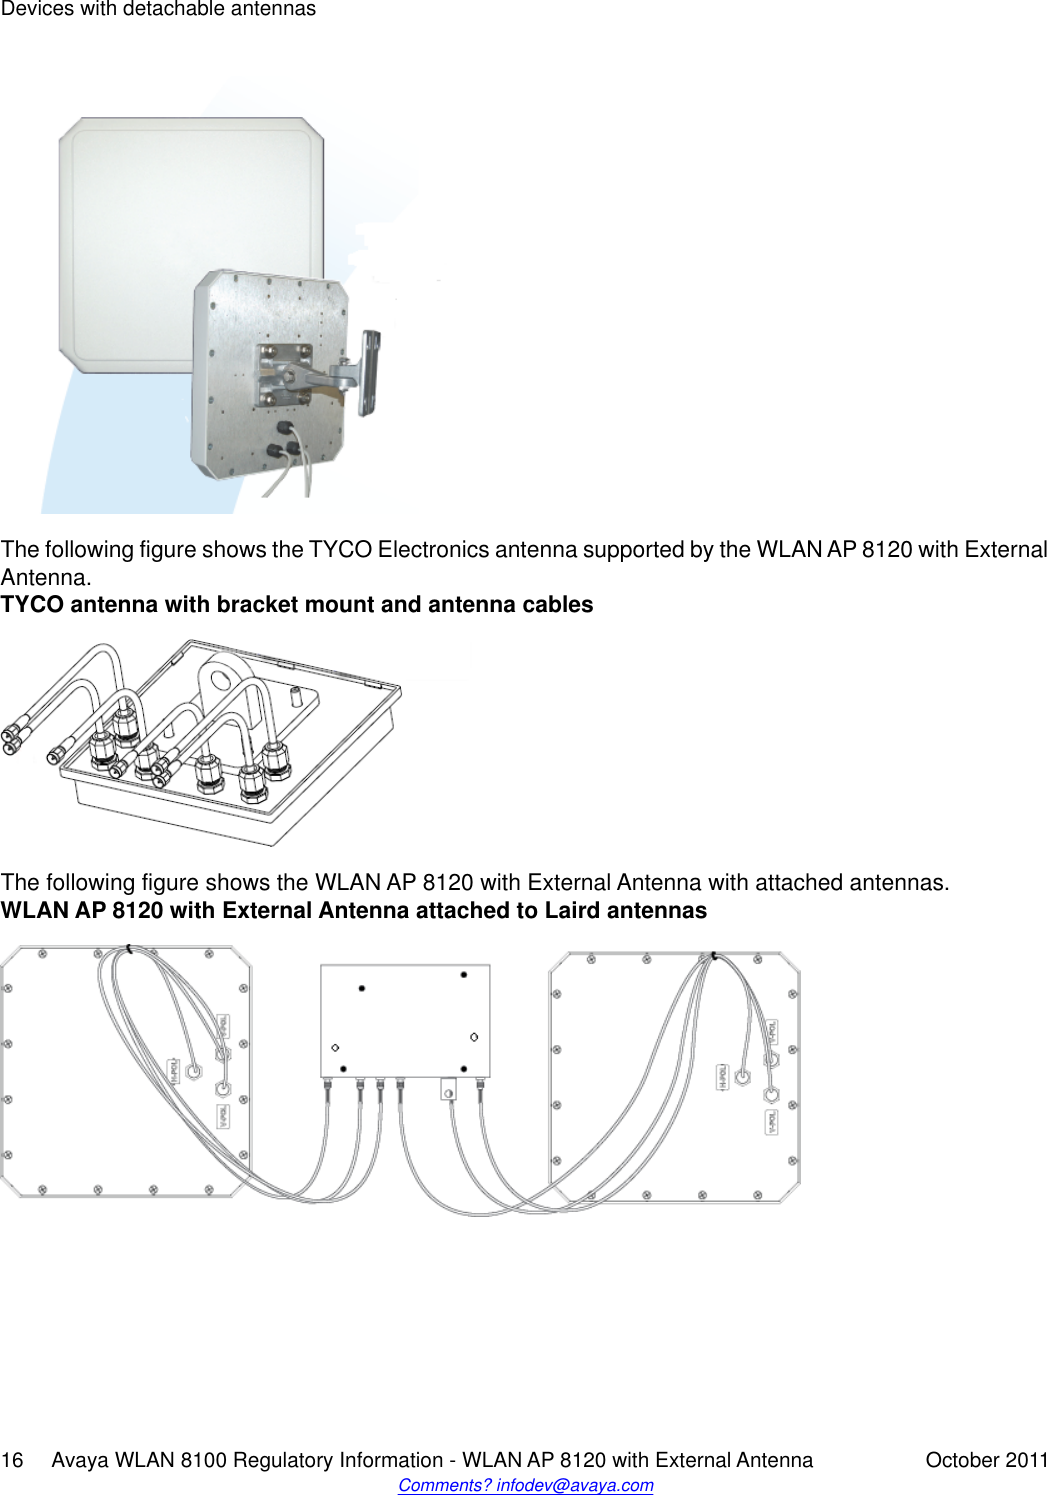 The following figure shows the TYCO Electronics antenna supported by the WLAN AP 8120 with ExternalAntenna.TYCO antenna with bracket mount and antenna cablesThe following figure shows the WLAN AP 8120 with External Antenna with attached antennas.WLAN AP 8120 with External Antenna attached to Laird antennasDevices with detachable antennas16     Avaya WLAN 8100 Regulatory Information - WLAN AP 8120 with External Antenna October 2011Comments? infodev@avaya.com